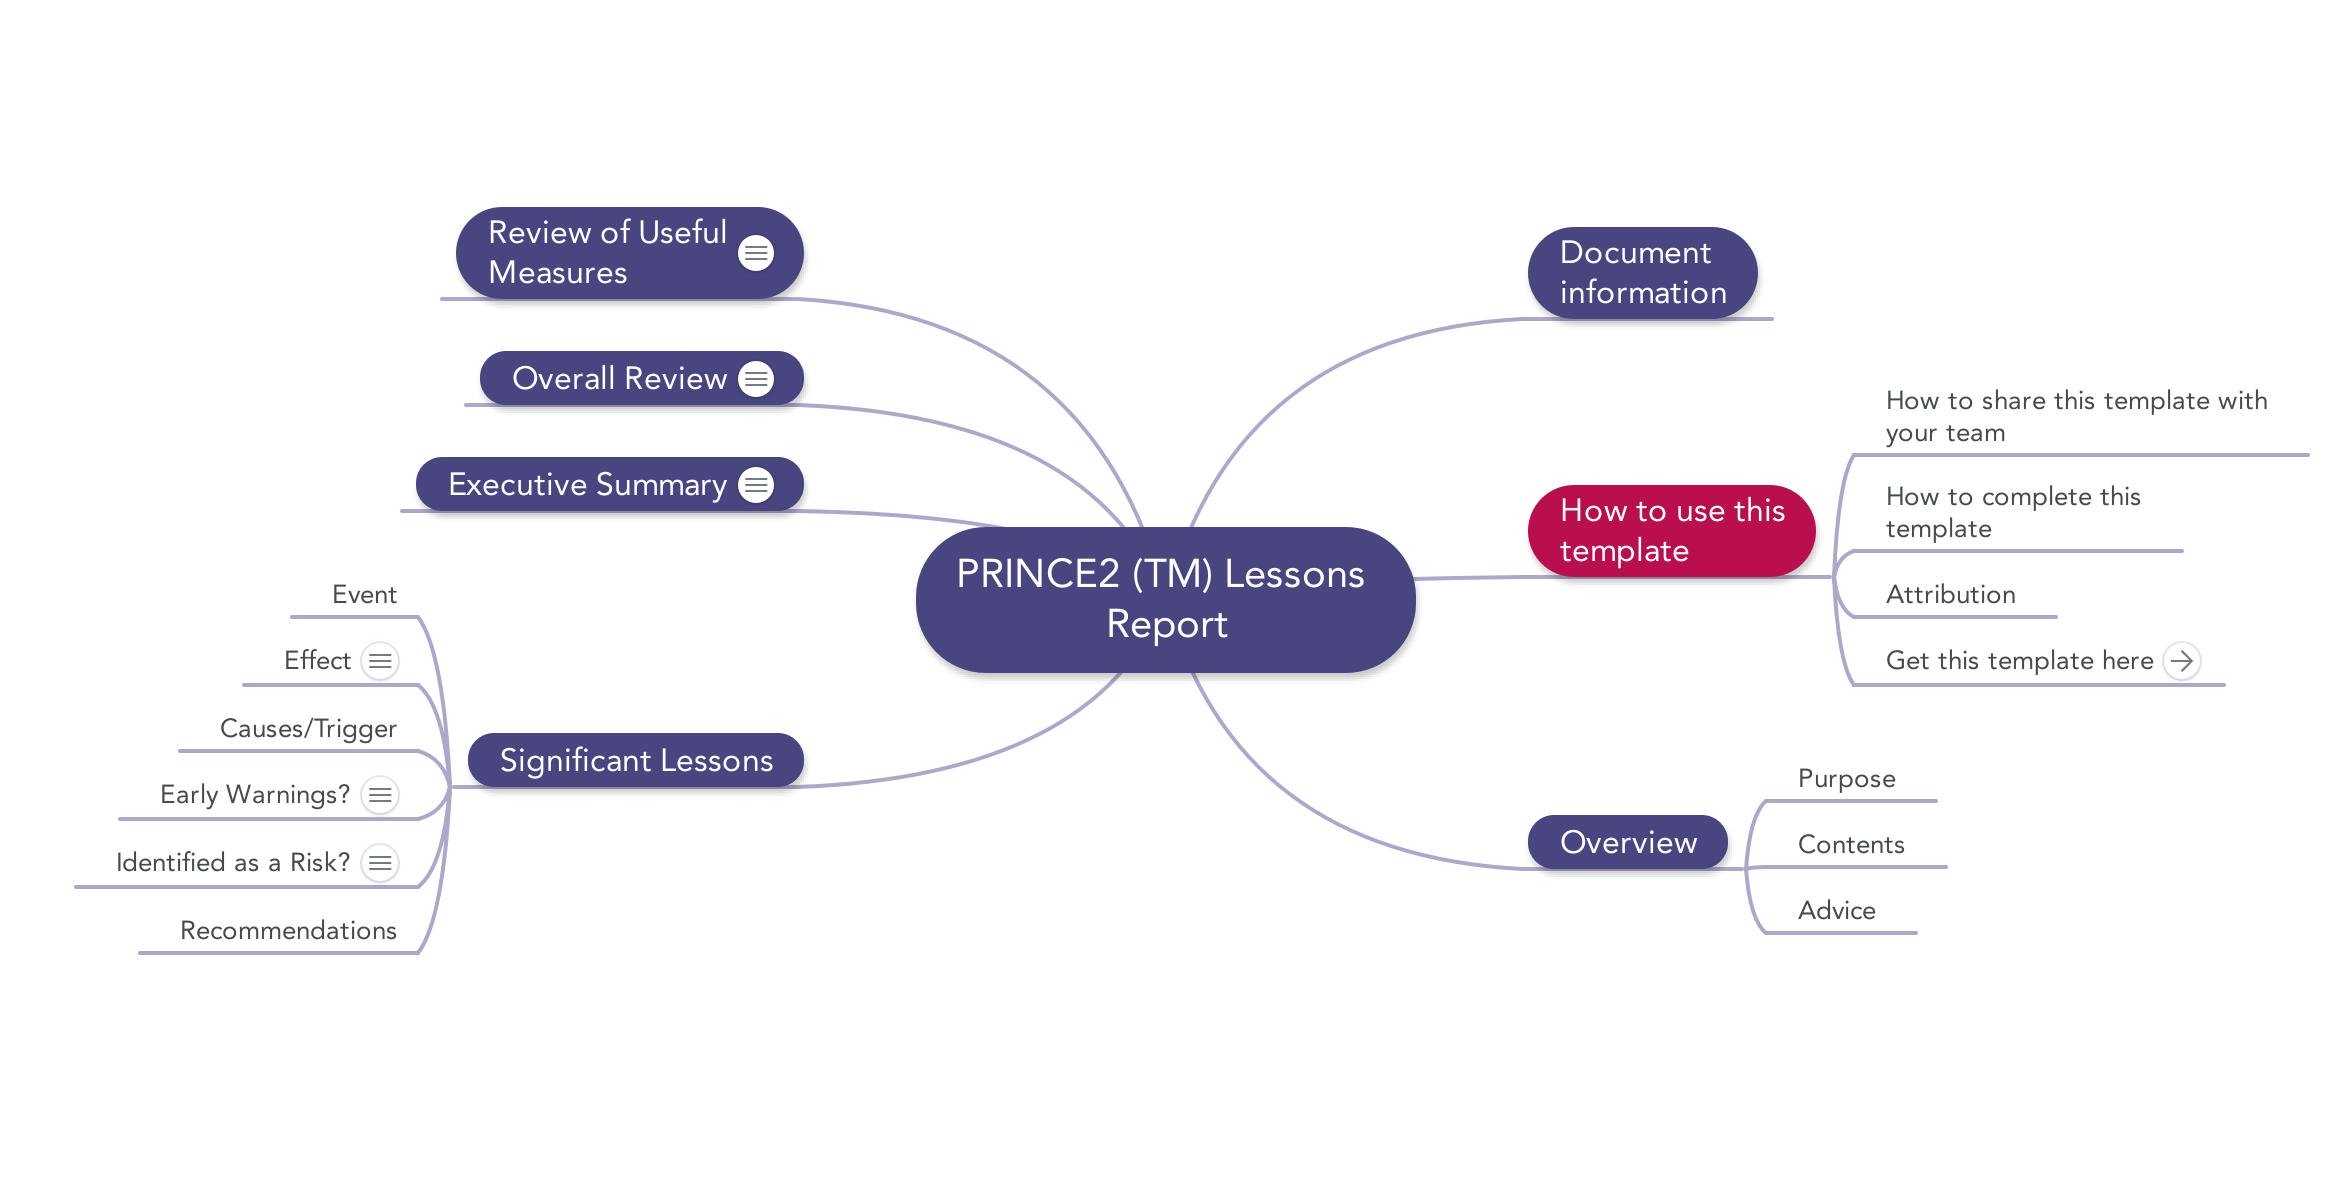 Prince2 Lessons Report | Download Template Intended For Prince2 Lessons Learned Report Template